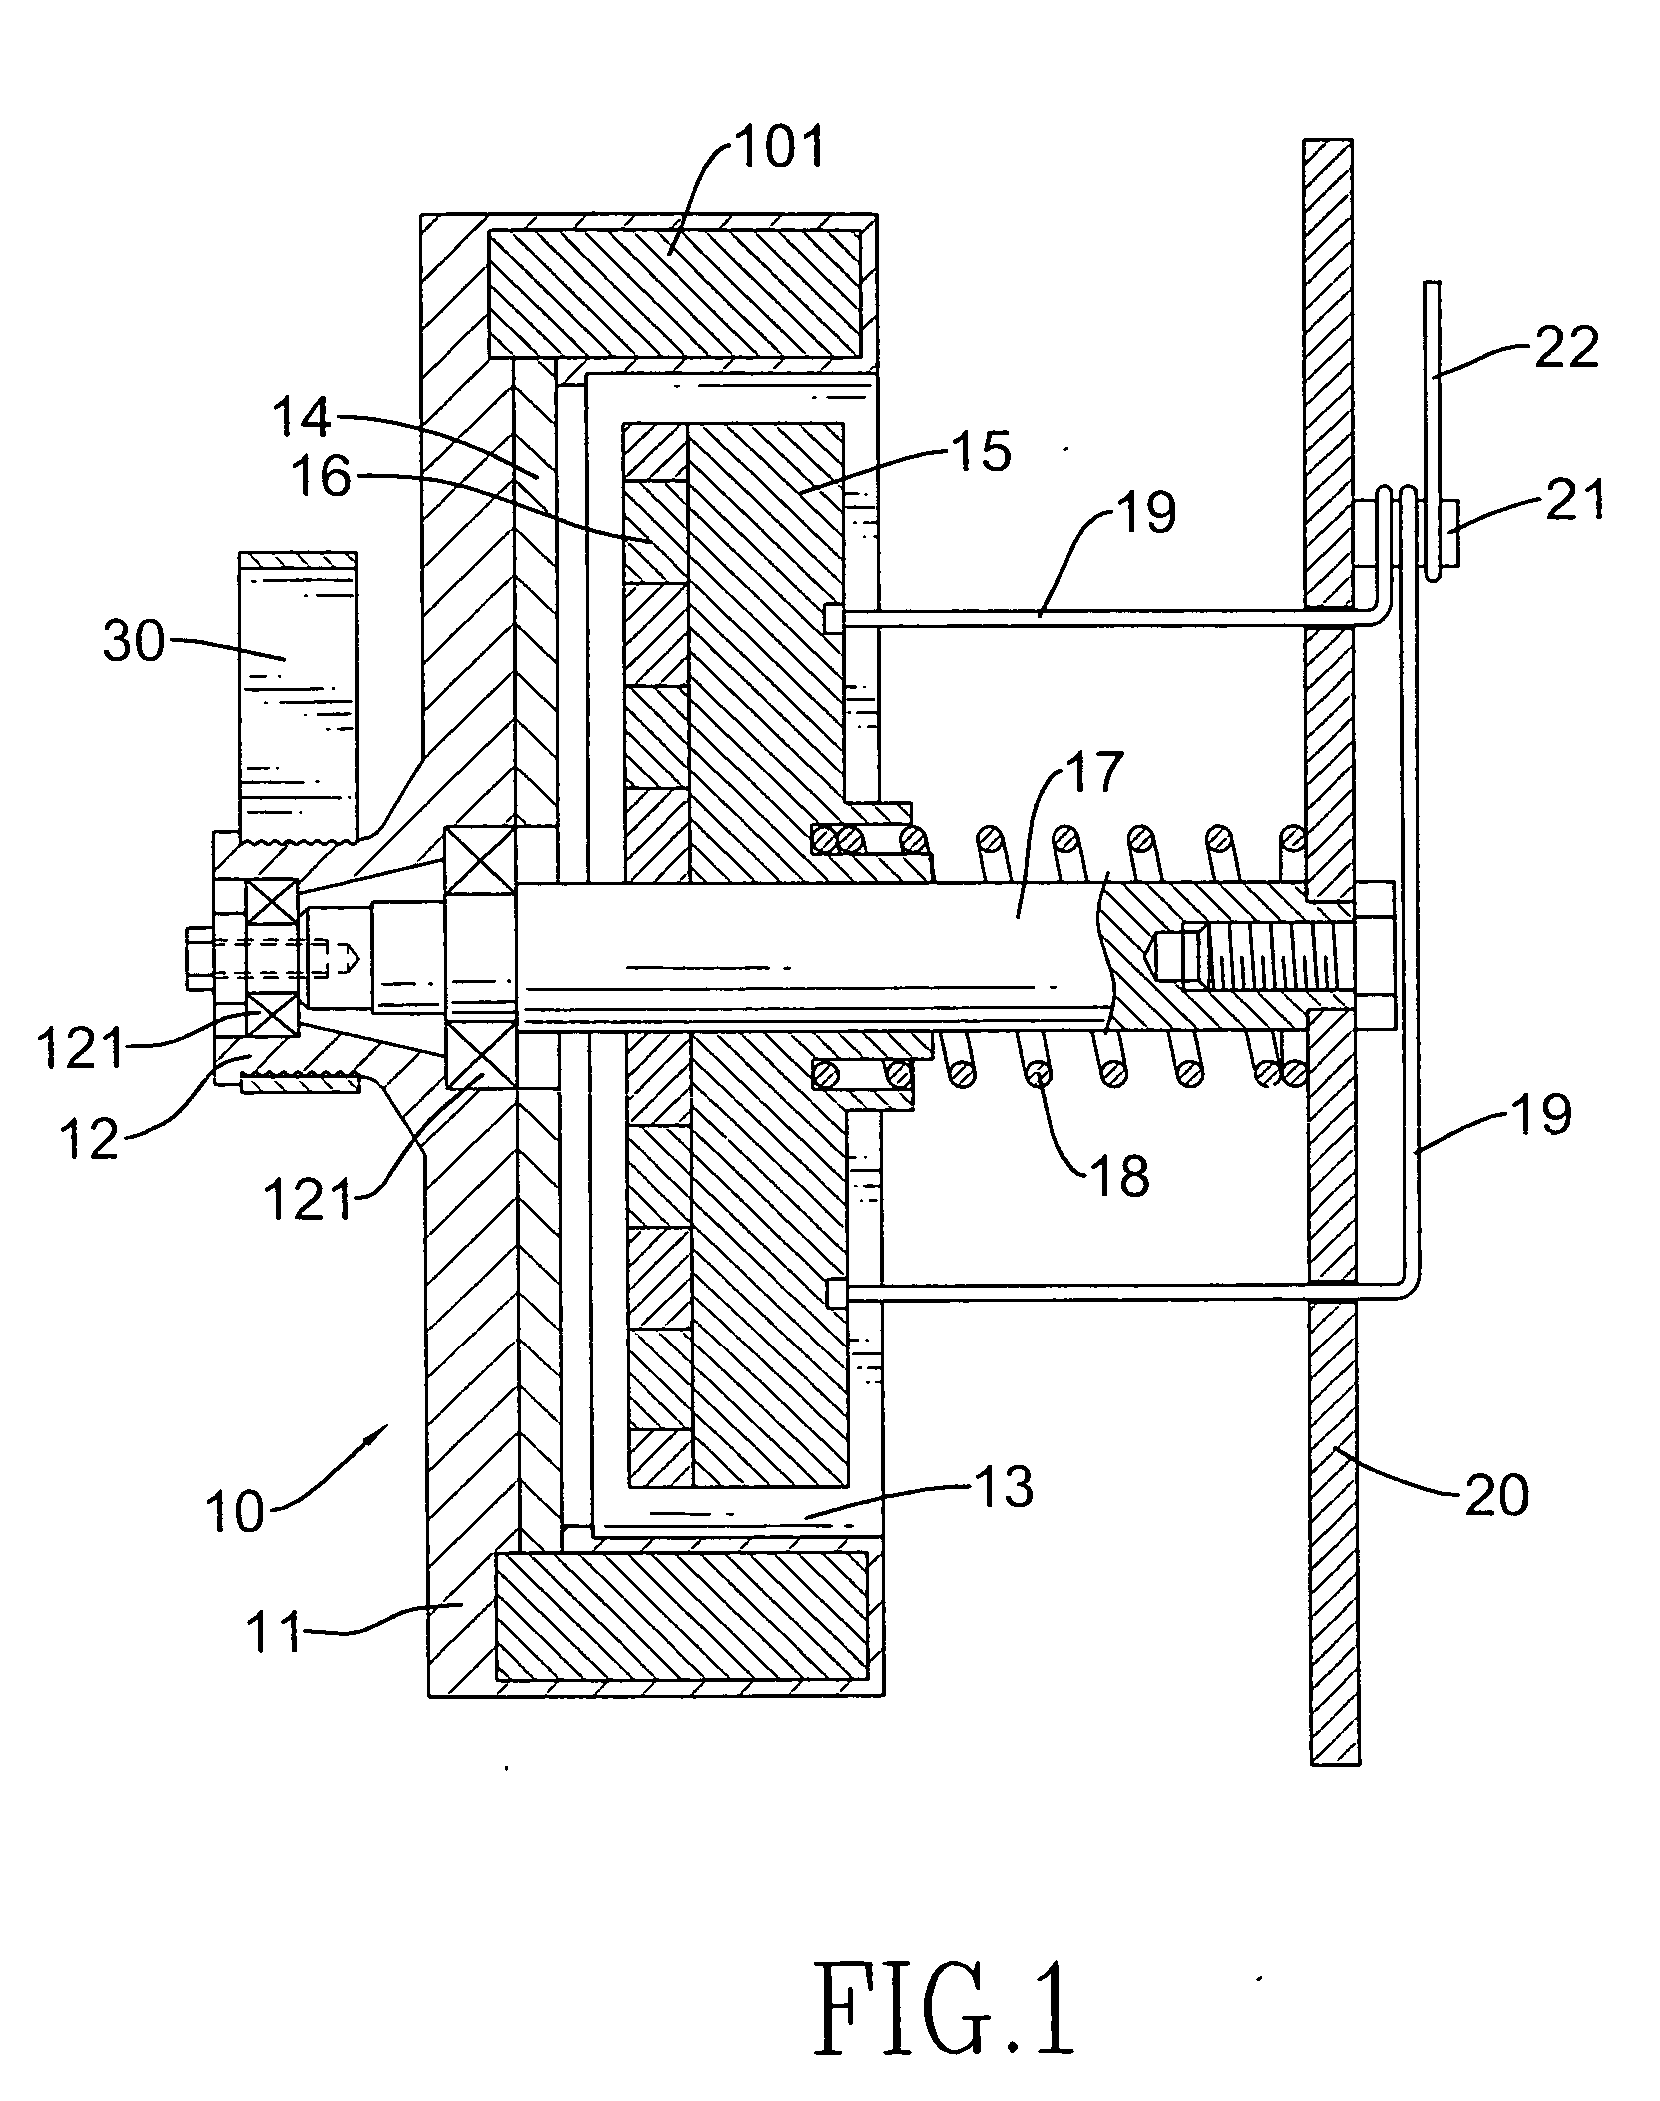 Magnetic dampening unit for an exercise gym apparatus